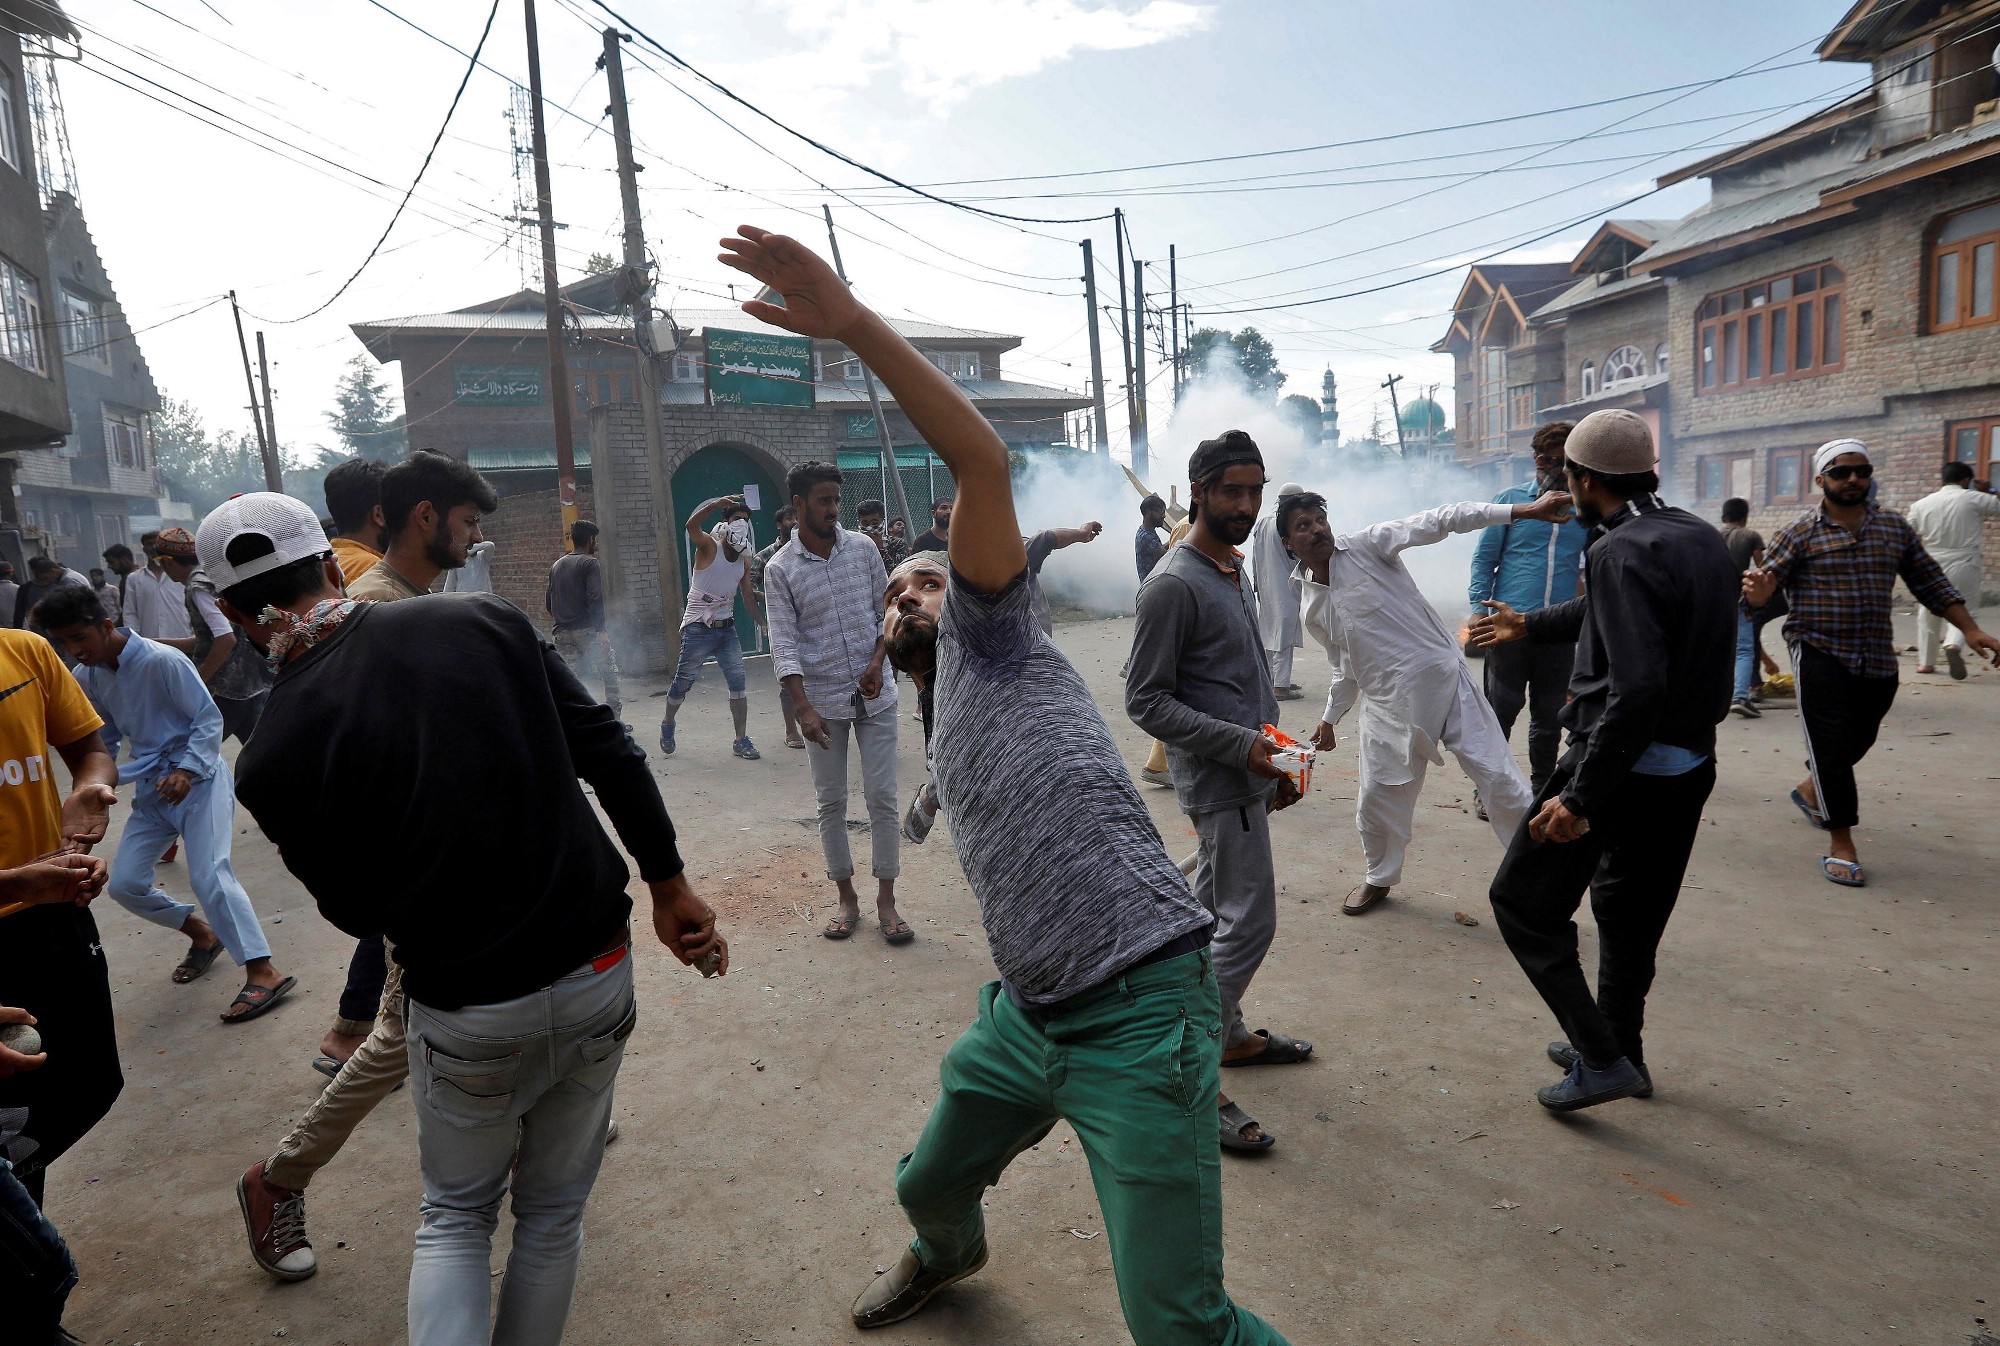 Kashmiri men throw stones towards Indian security forces during clashes following scrapping of the special constitutional status for Kashmir by the Indian government, in Srinagar, August 23, 2019. REUTERS/Adnan Abidi